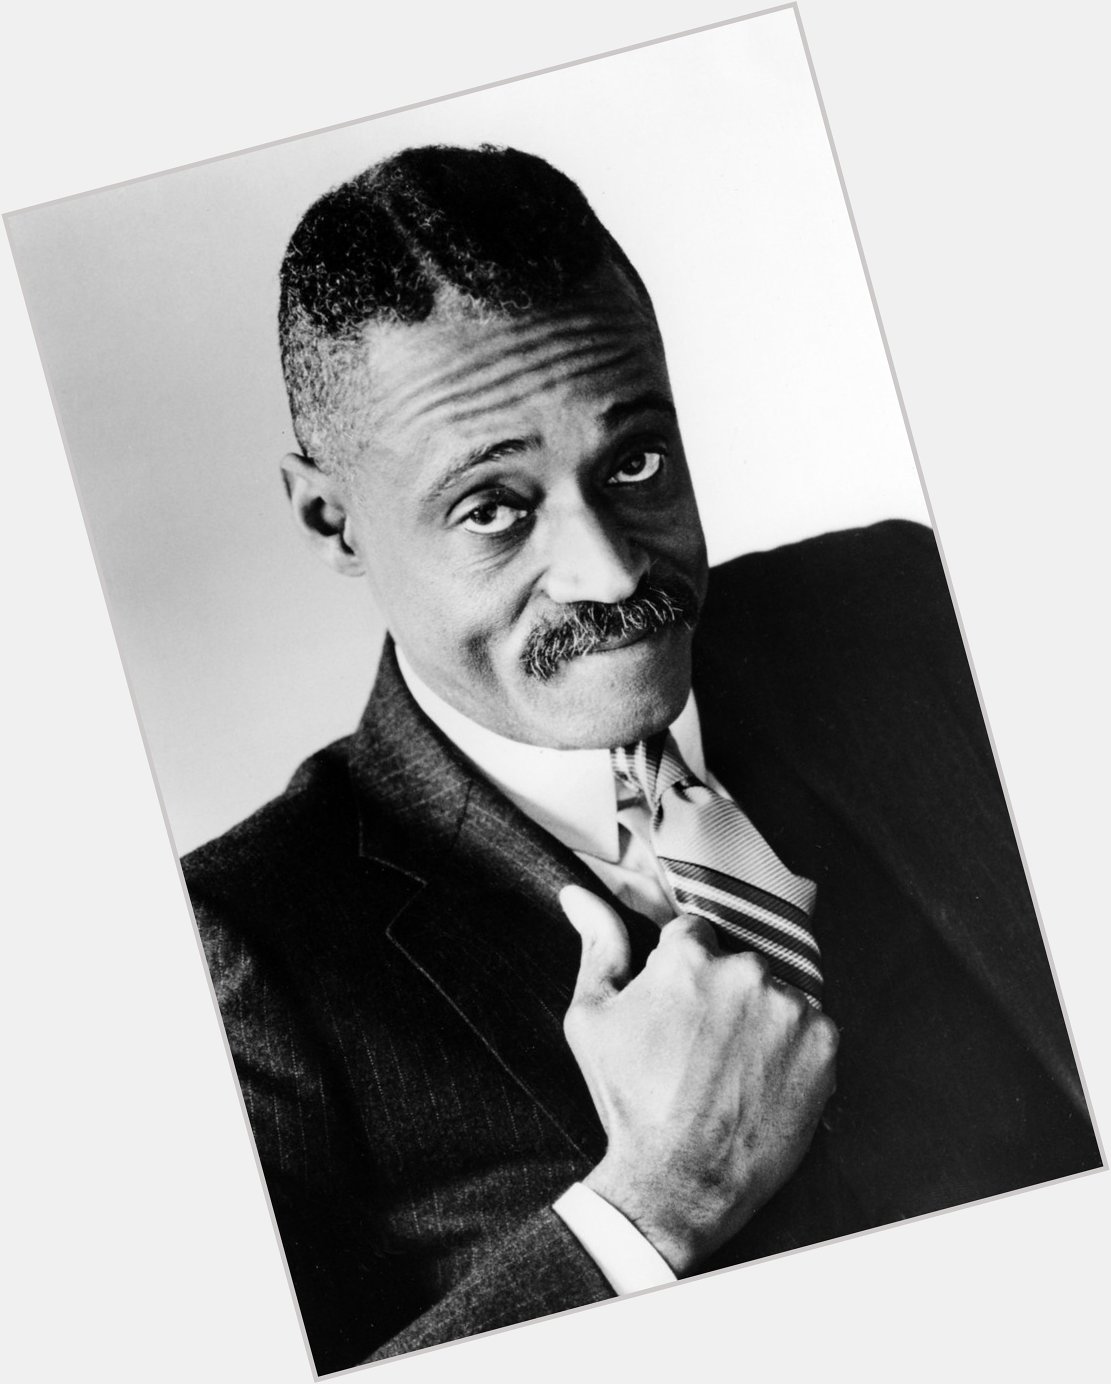 Happy birthday Melvin Van Peebles! Check out our episode on The Story of a Three-Day Pass:  